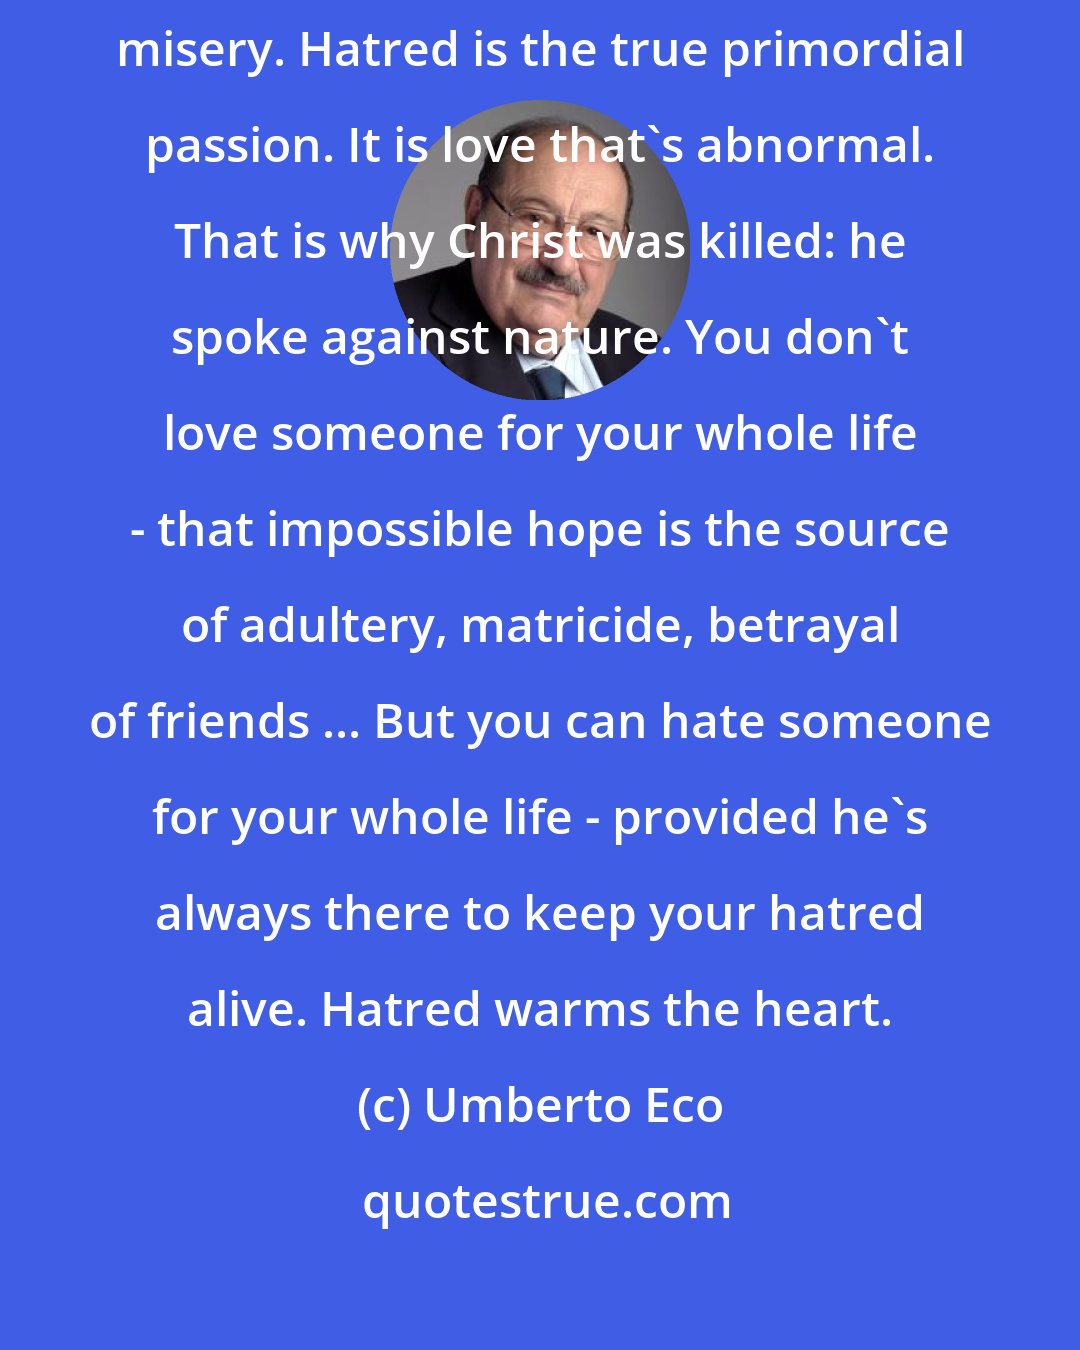 Umberto Eco: You always want someone to hate in order to feel justified in your own misery. Hatred is the true primordial passion. It is love that's abnormal. That is why Christ was killed: he spoke against nature. You don't love someone for your whole life - that impossible hope is the source of adultery, matricide, betrayal of friends ... But you can hate someone for your whole life - provided he's always there to keep your hatred alive. Hatred warms the heart.